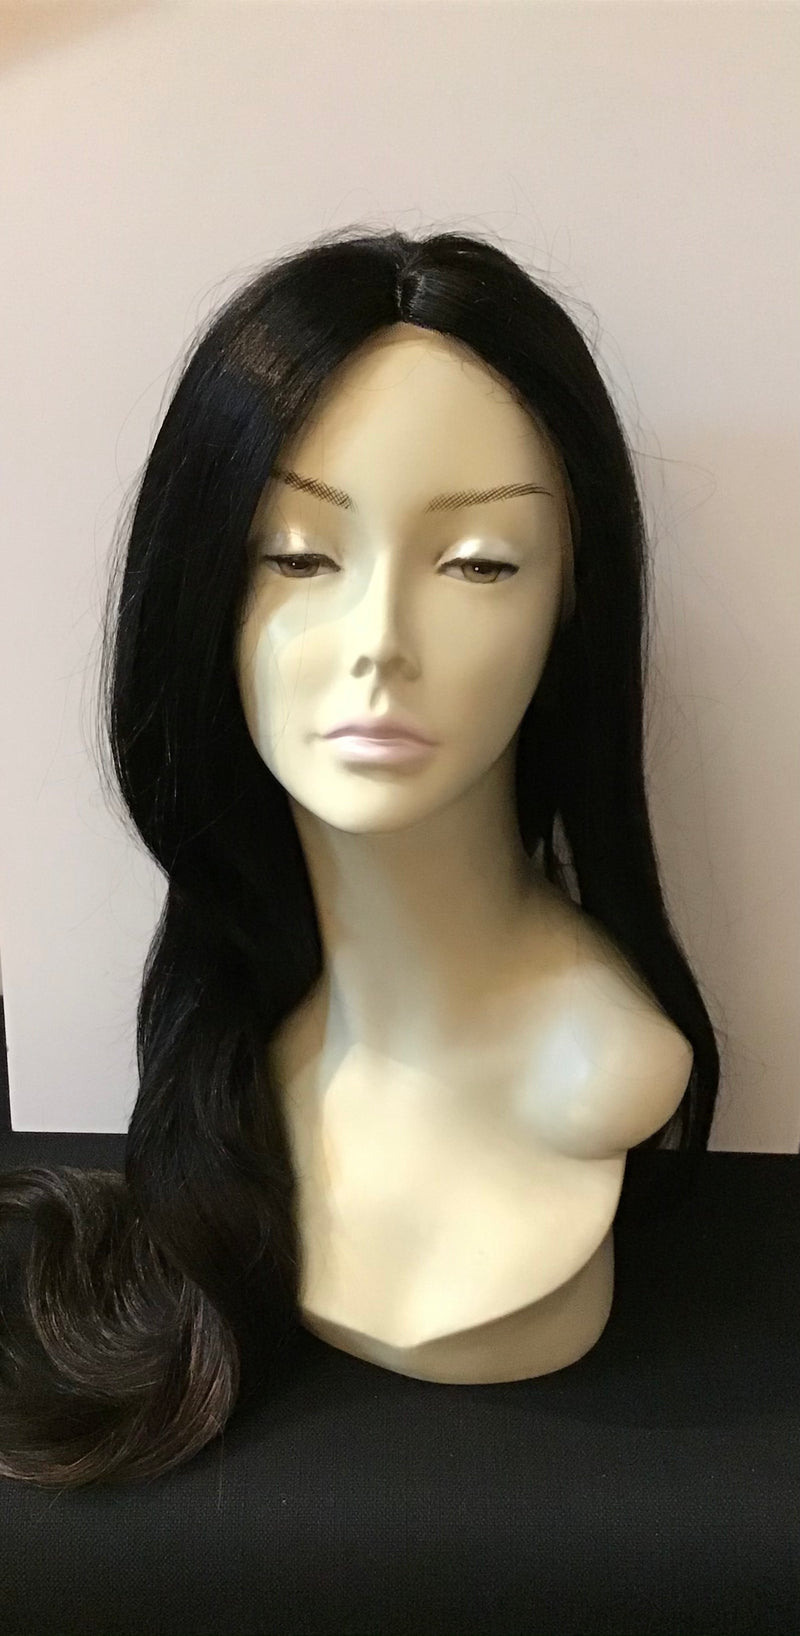 Extra Long Straight Wig with Lace Front - Off Black/Copper Blonde - Model Express Vancouver